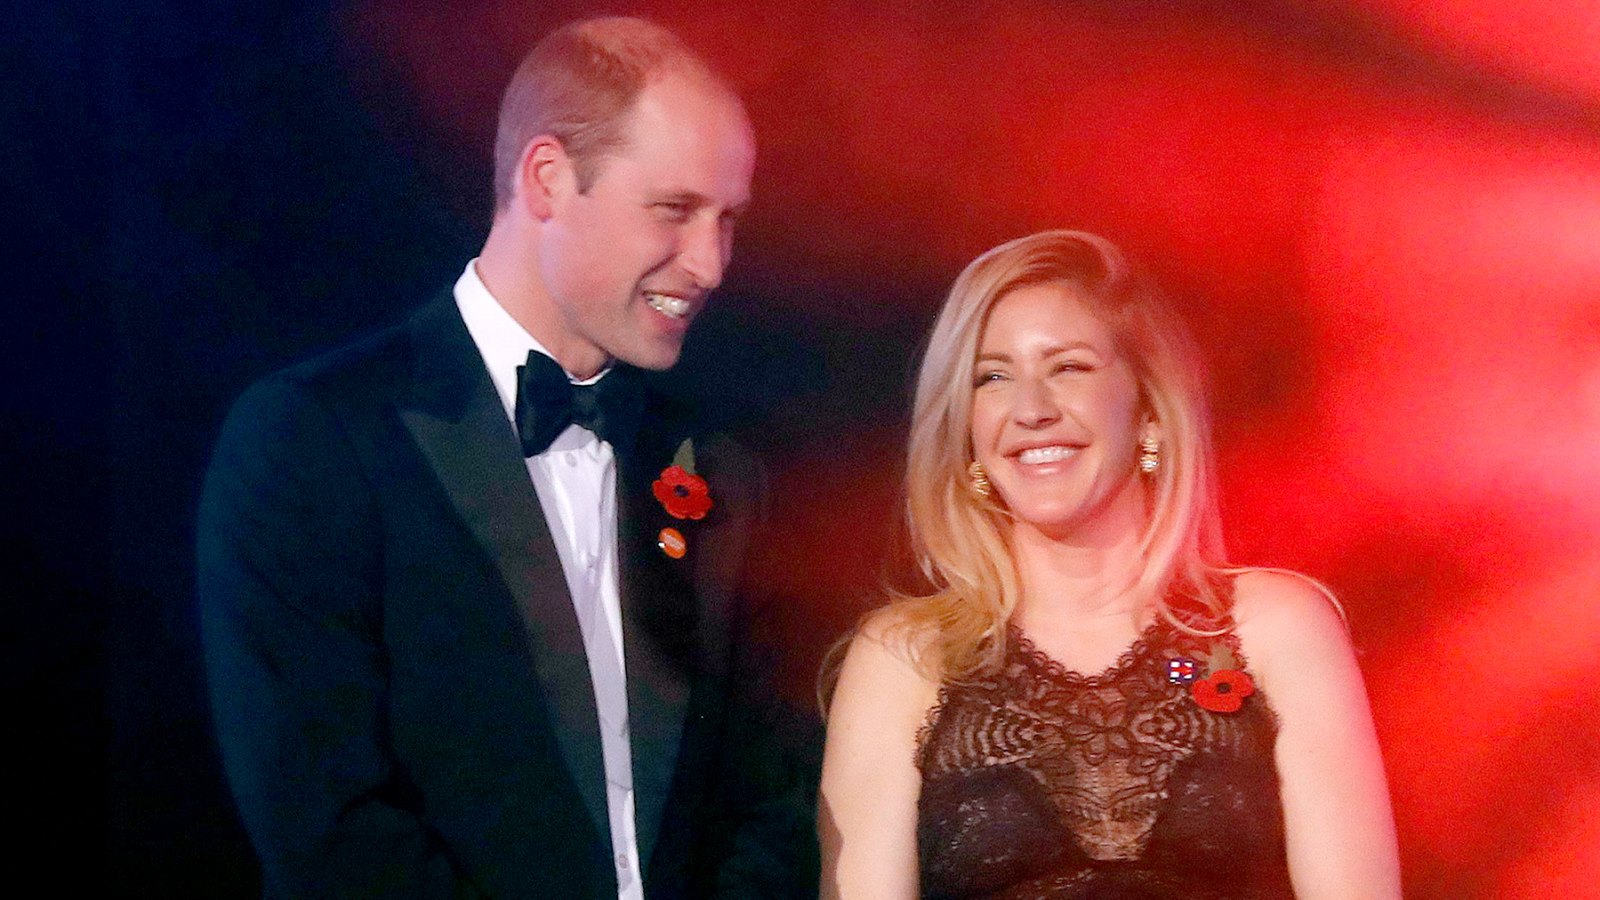 Britain's Prince William (L), The Duke of Cambridge speaks to British singer-songwriter Ellie Goulding (R) as they attend Centrepoint at the Palace, a fundraising event in the grounds of Kensington Palace in London on November 10, 2016 in aid of youth homeless charity Centrepoint.